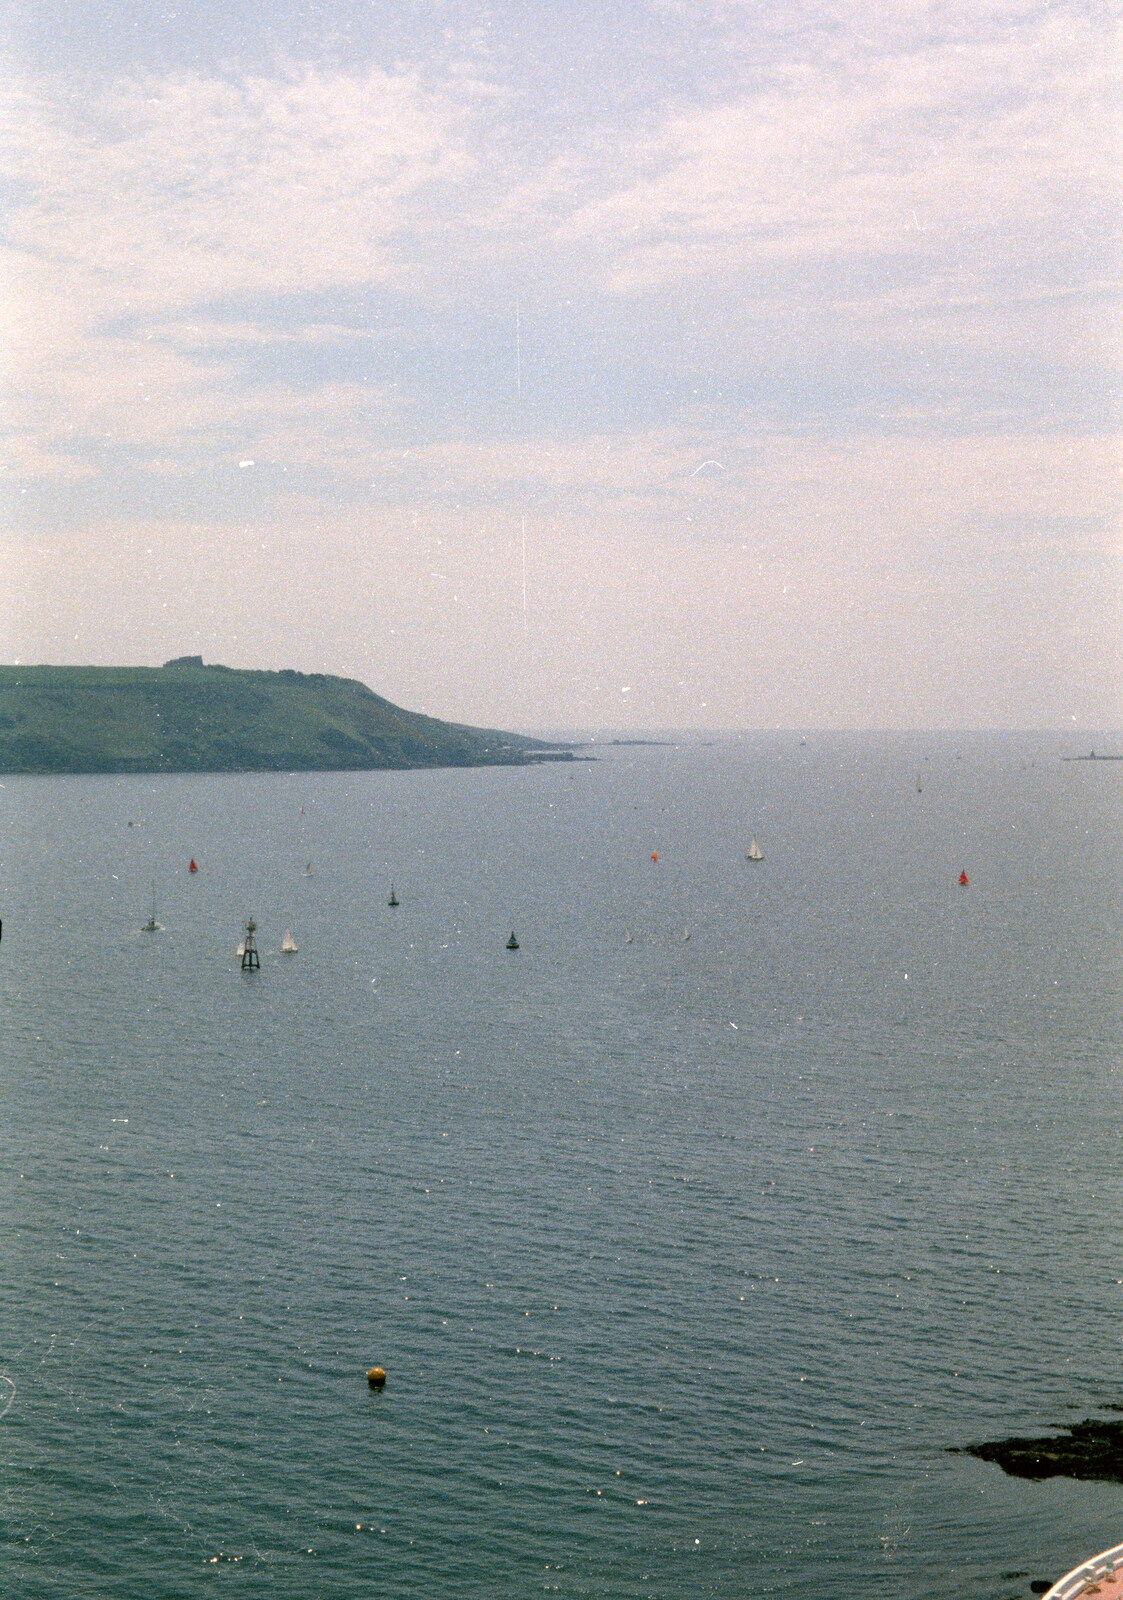 Out to Plymouth Sound and the Breakwater from Uni: A Plymouth Hoe Panorama, Plymouth, Devon - 7th May 1986